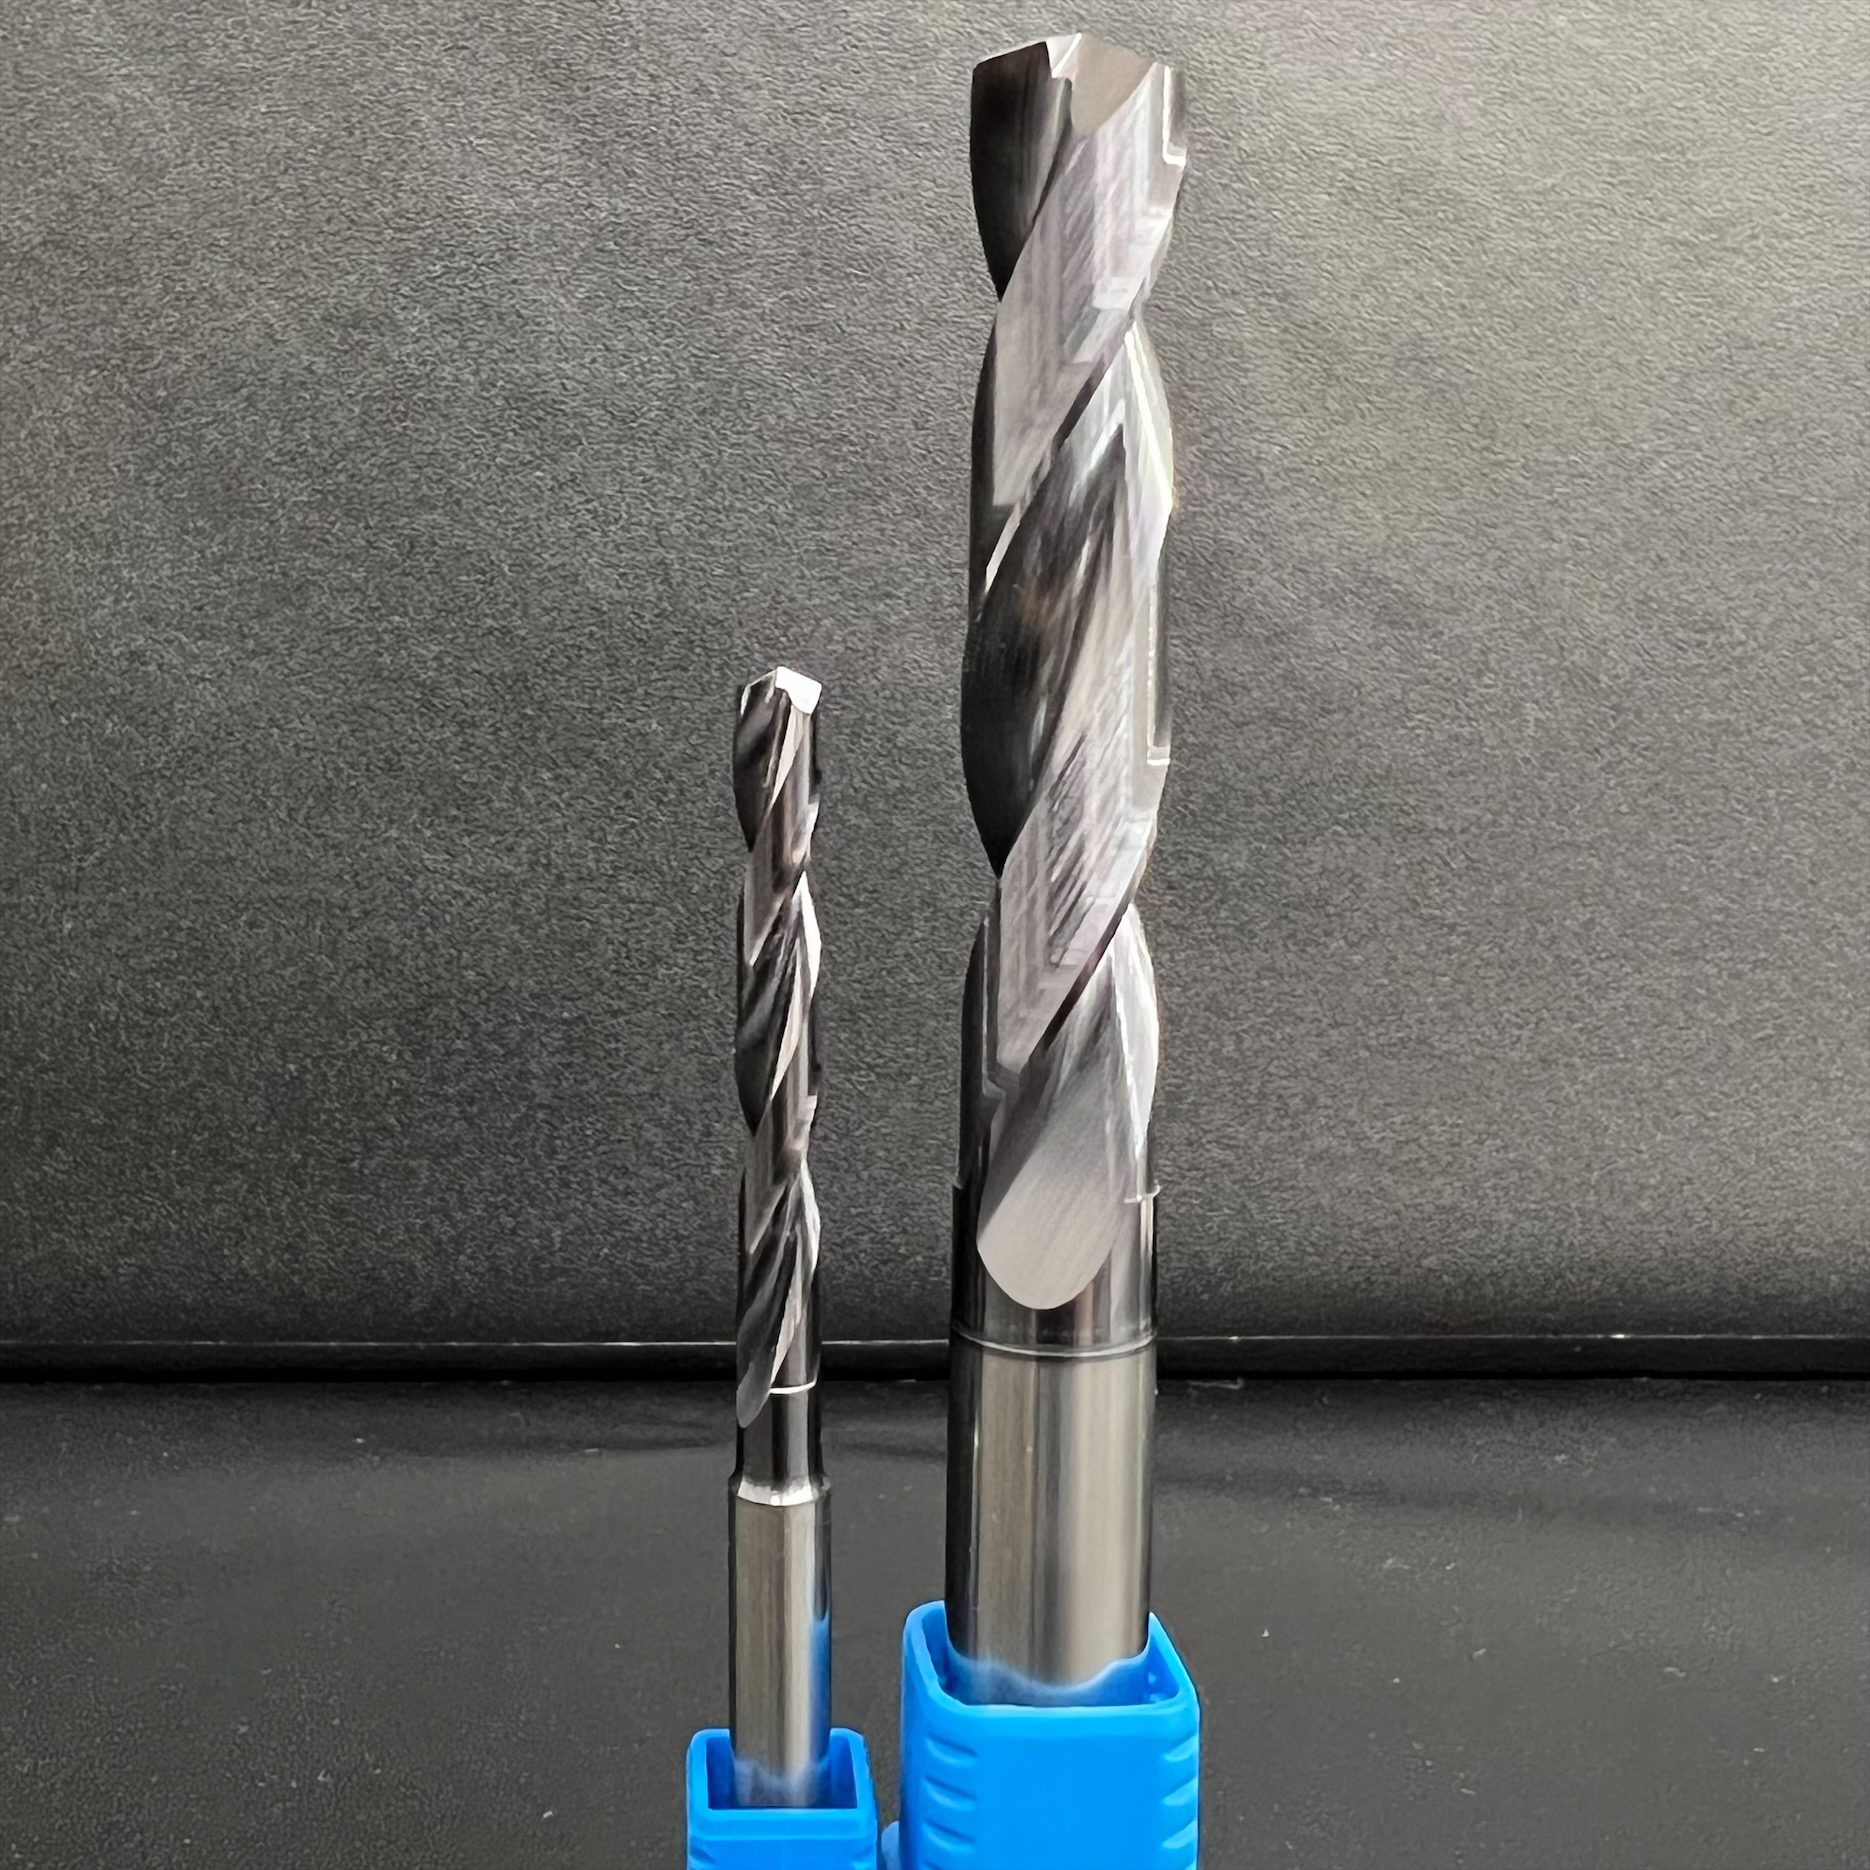 CTS5D 超硬5Dタイプオイル穴有り2枚刃ドリル【刀】 2 Flutes Tungsten Carbide Drill 5D Type with Oil Hole